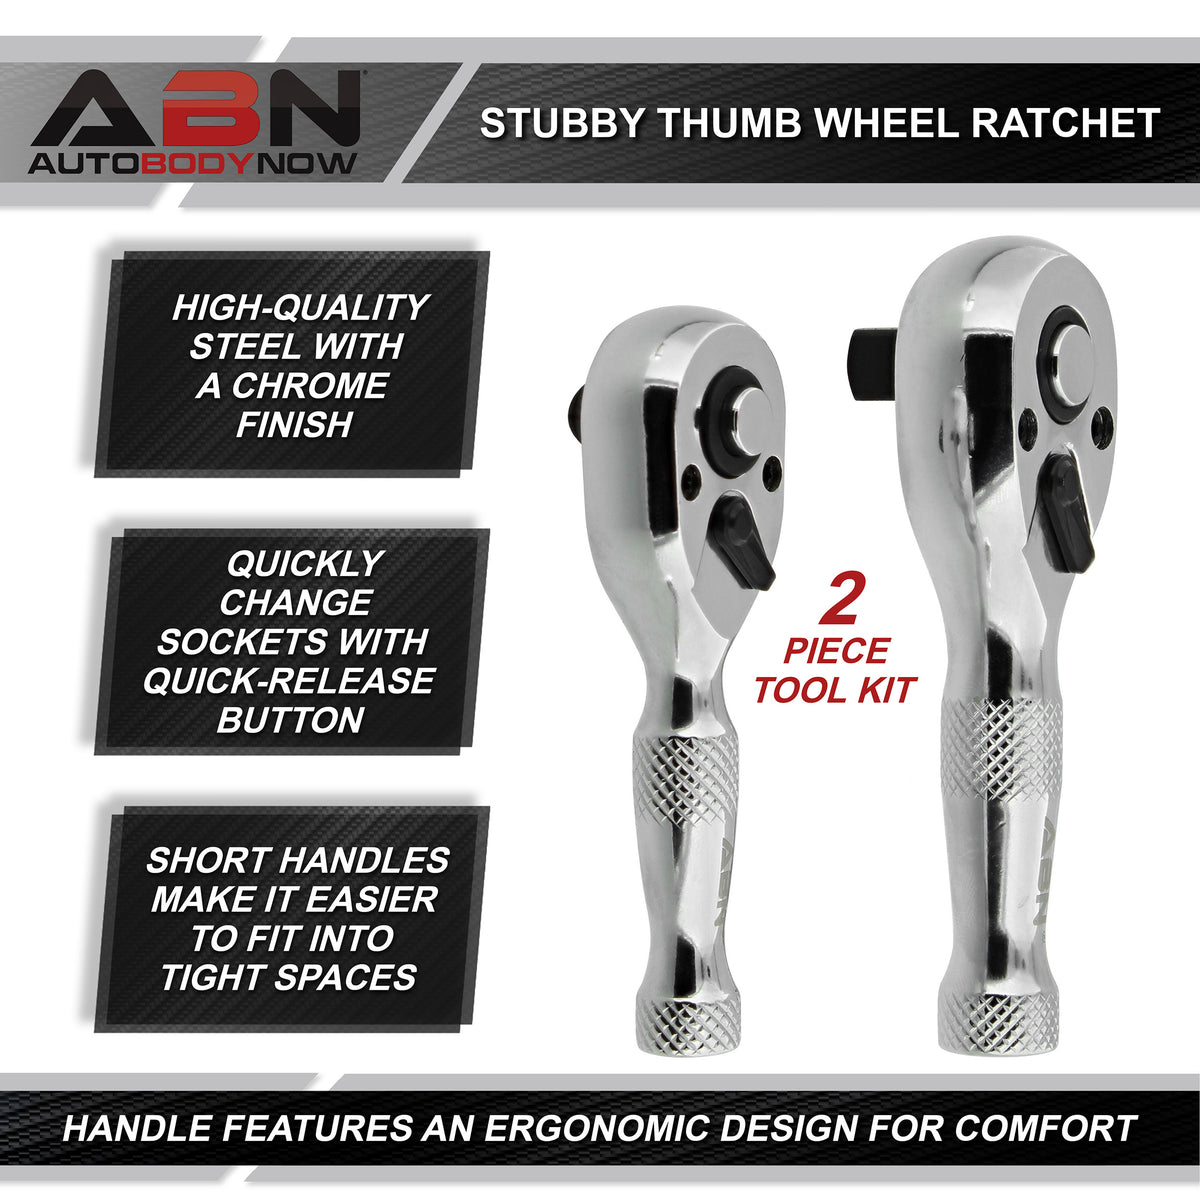 2pc Stubby Ratchet Wrench Tool 1/4 and 3/8in Drive Thumb Wheel Ratchet